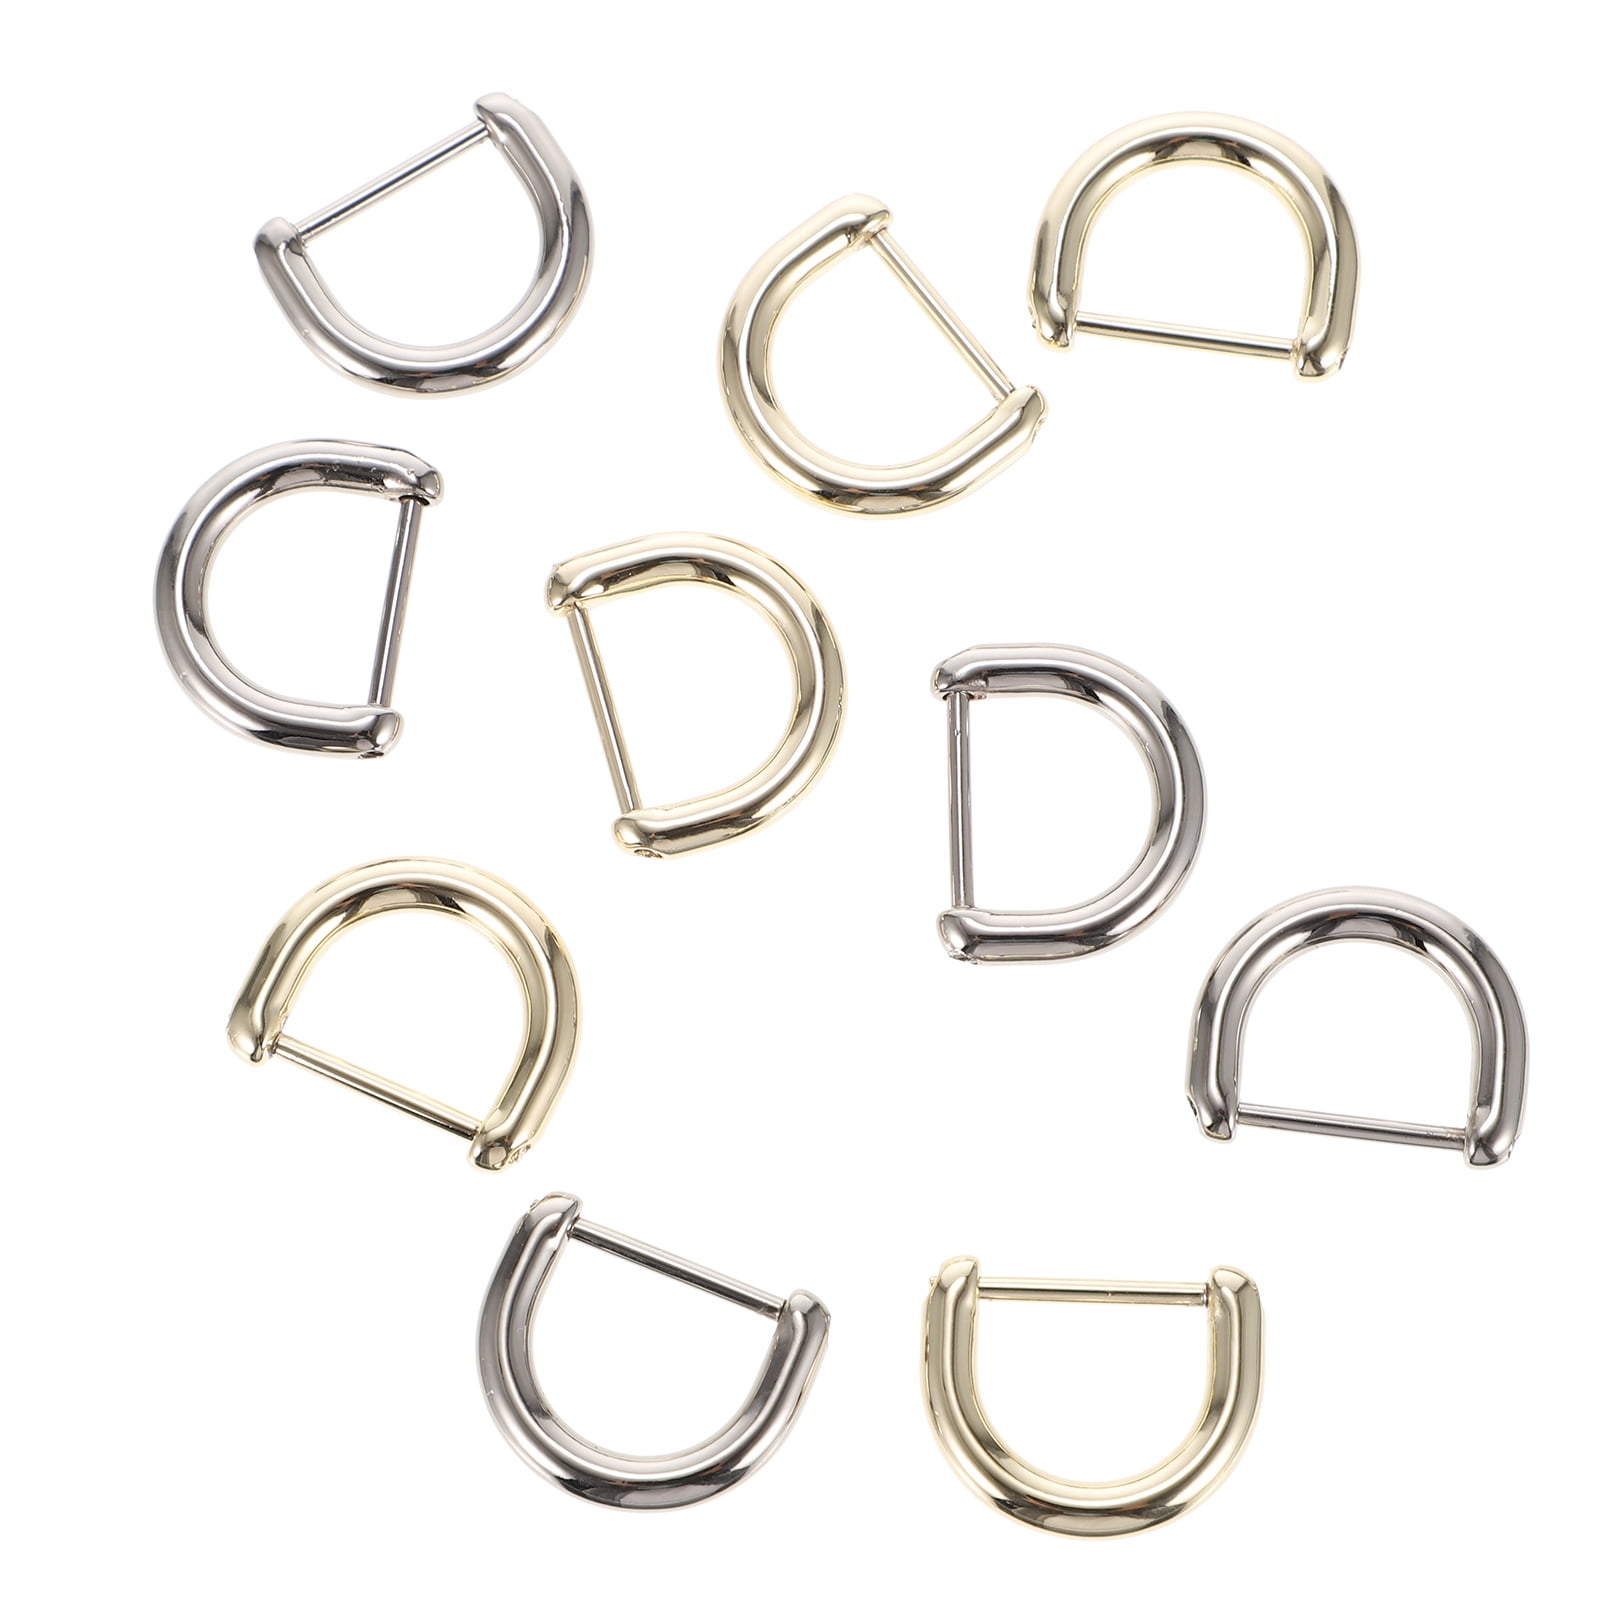 Nimida D Rings 3/4” inch | Good for 1/2 inch | Golden Buckles for